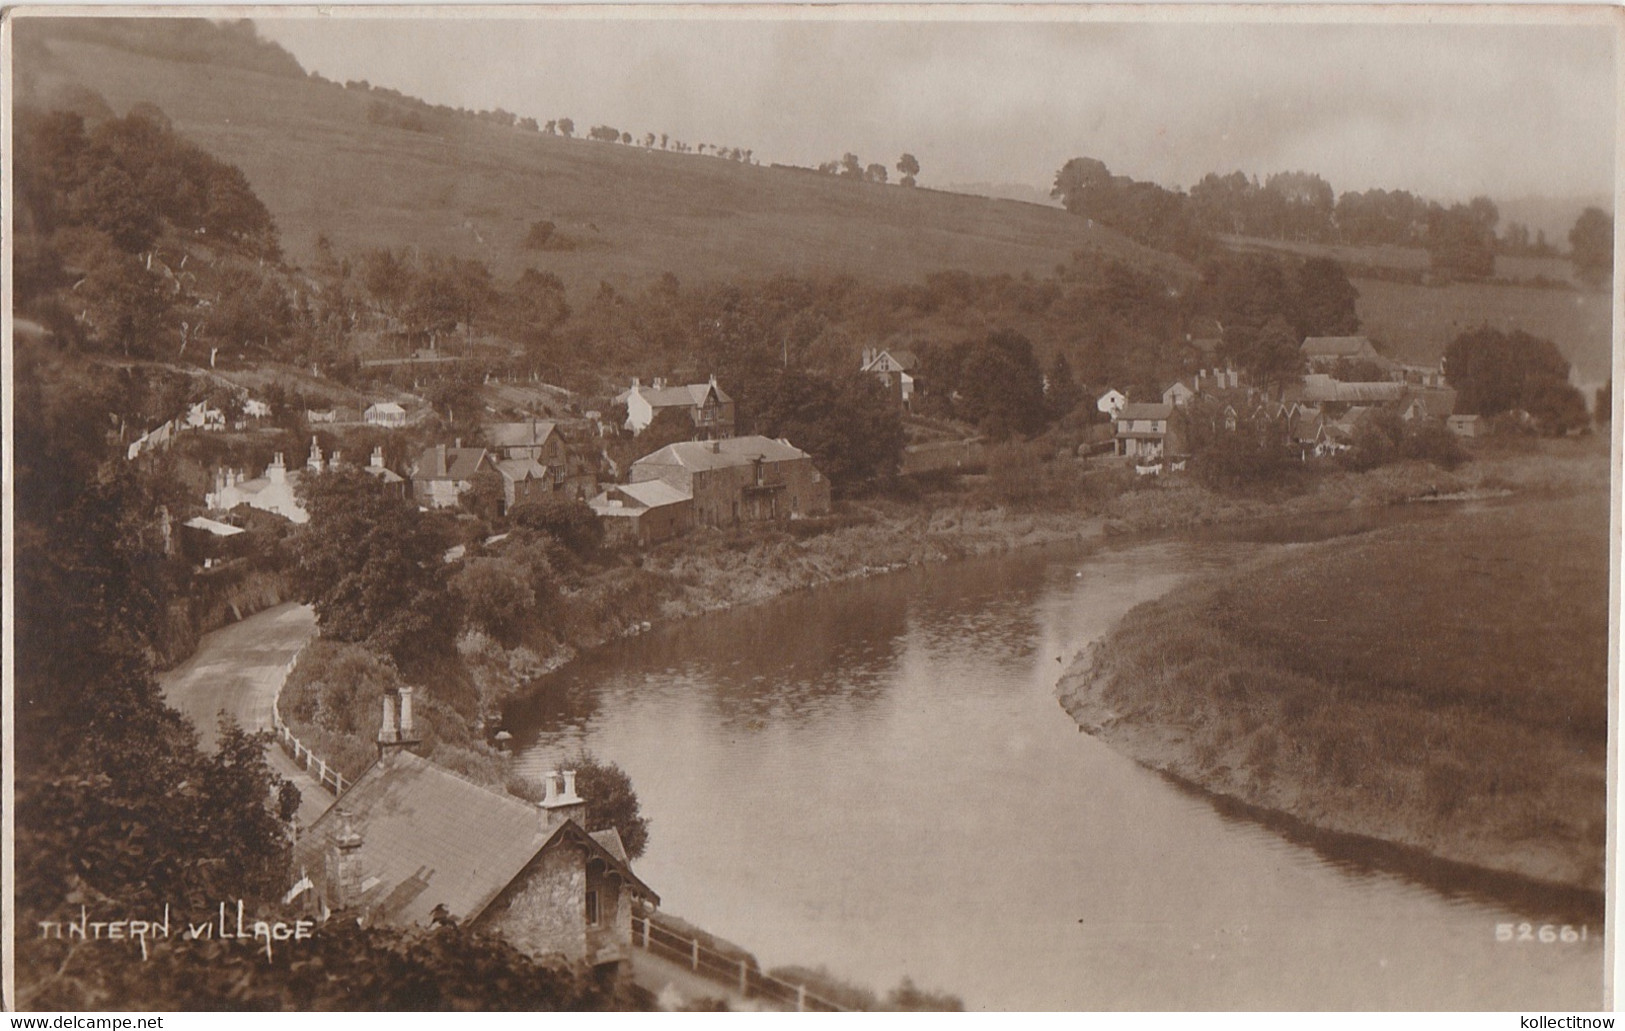 TINTERN VILLAGE - MONMOUTHSHIRE - REAL PHOTOGRAPH - Monmouthshire